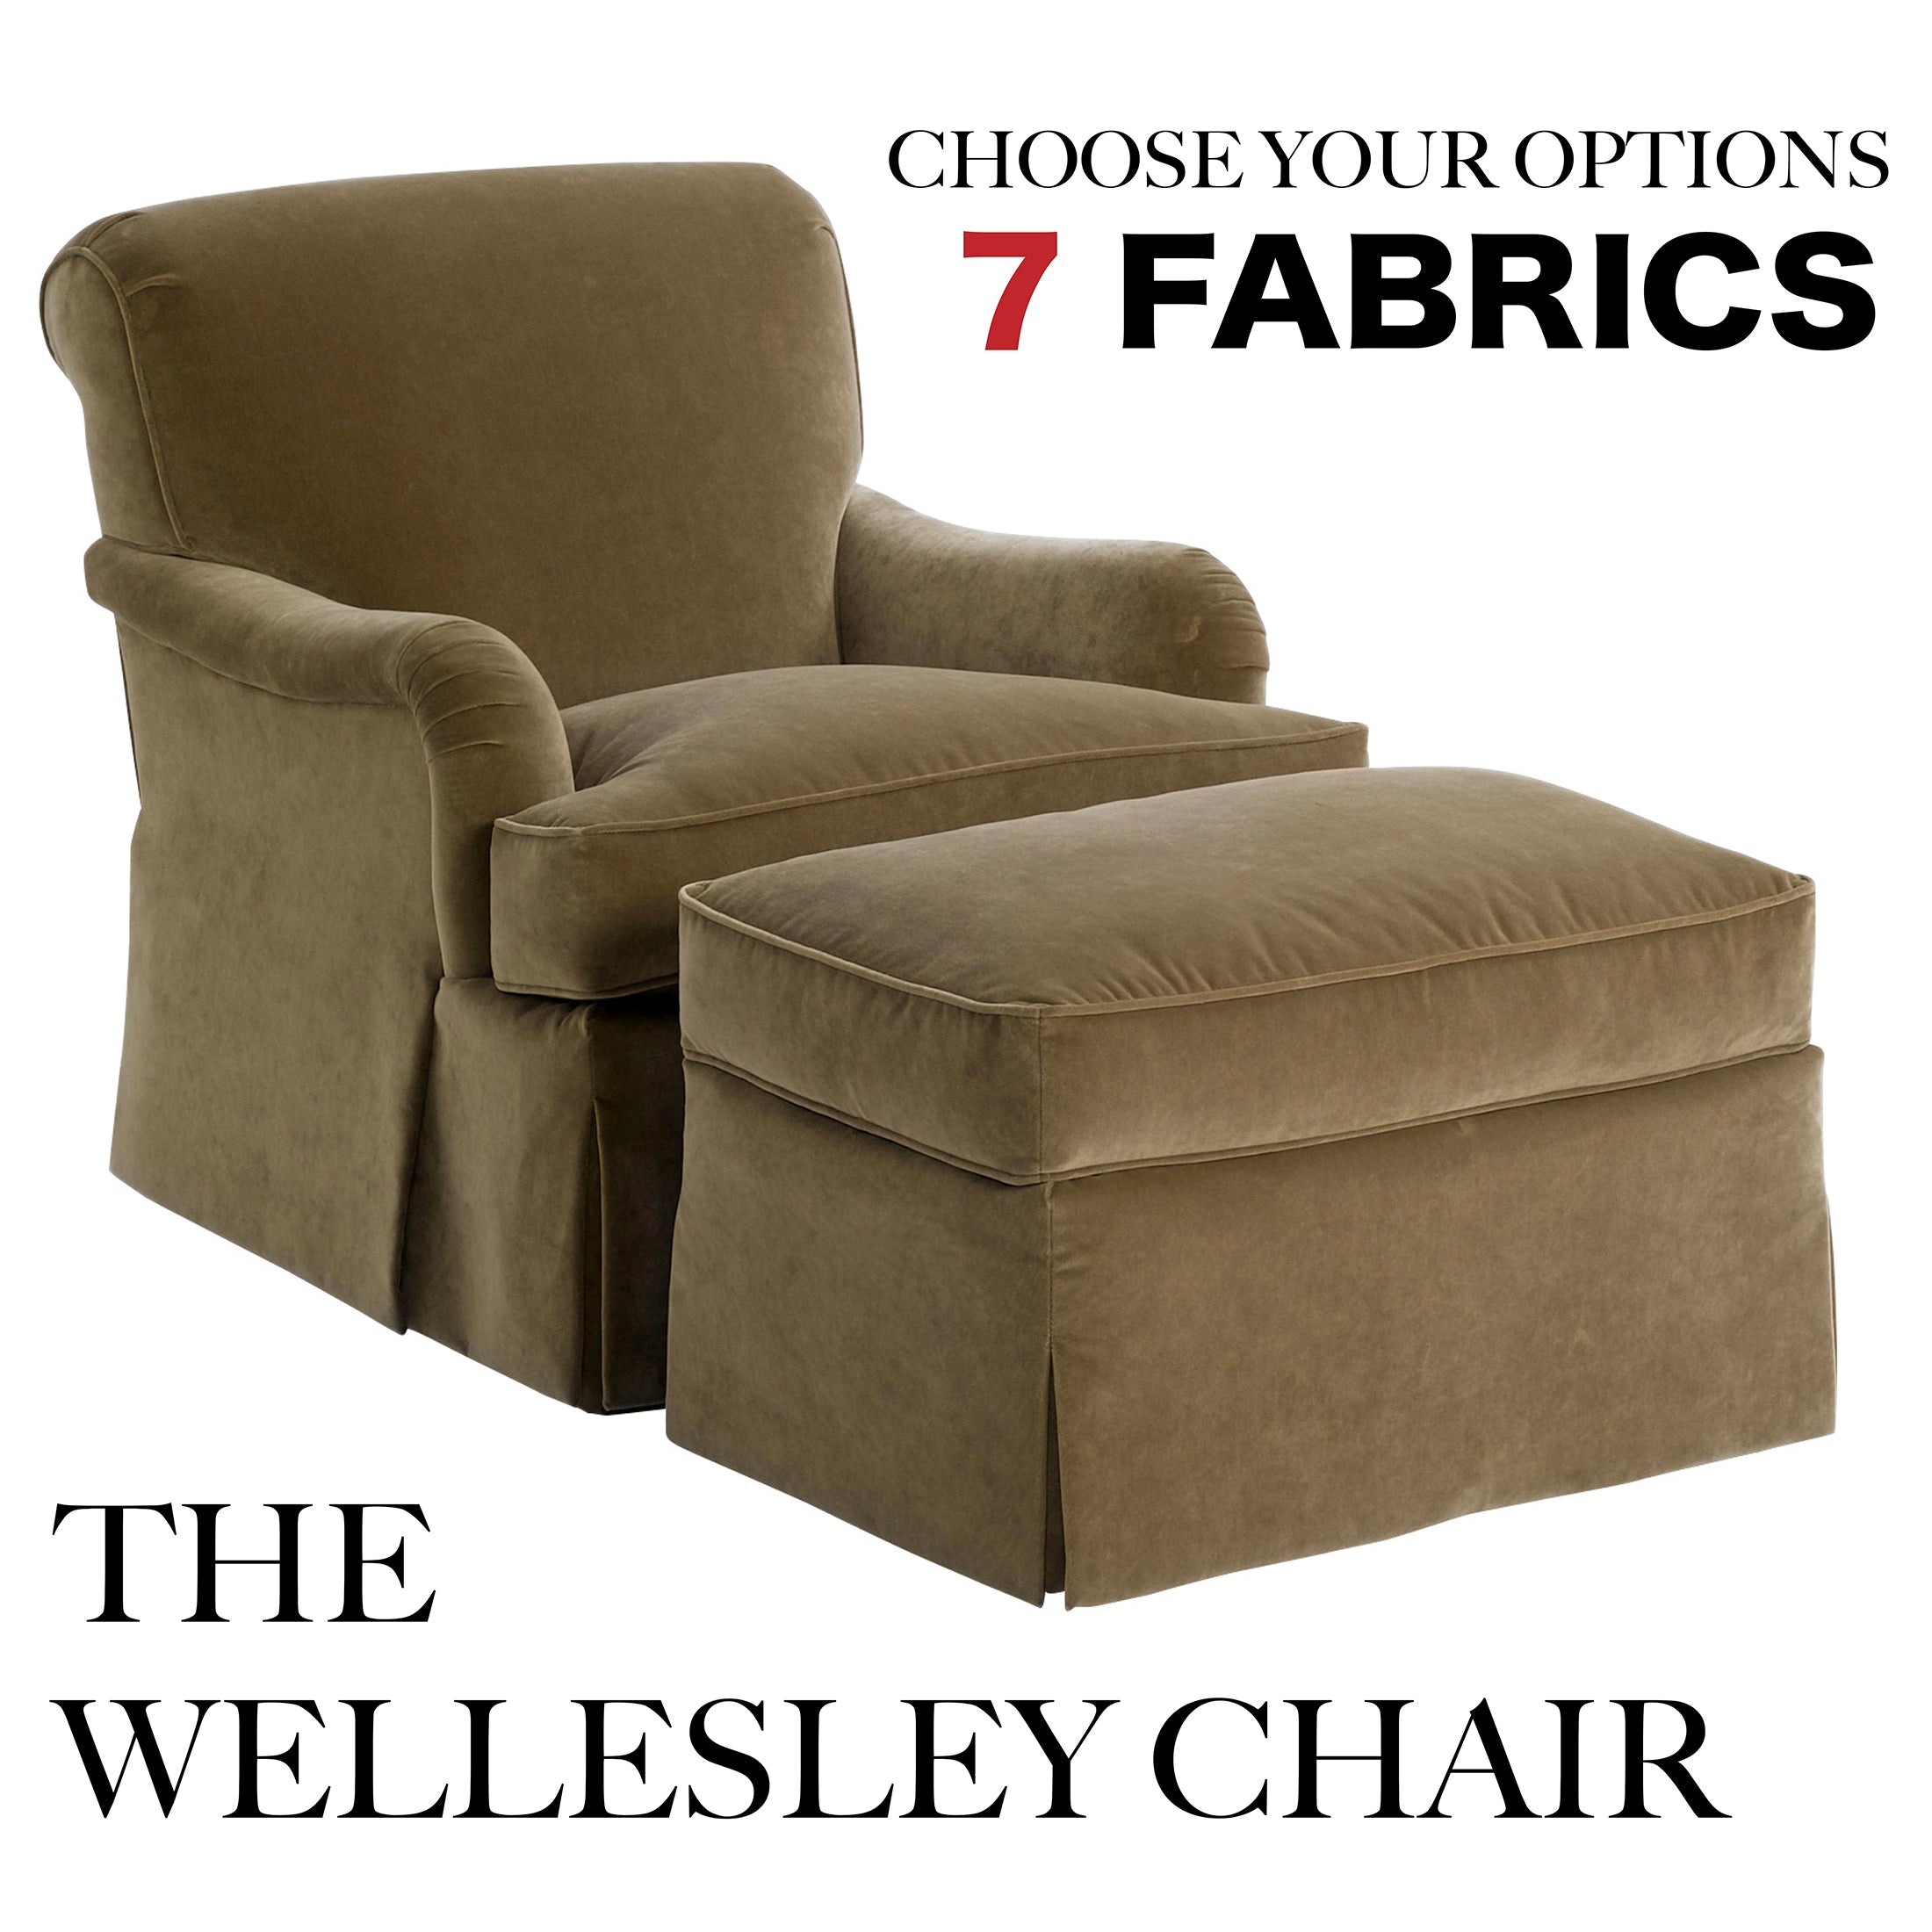 Make you own Wellesley Chair shown in Endeavor Java fabric